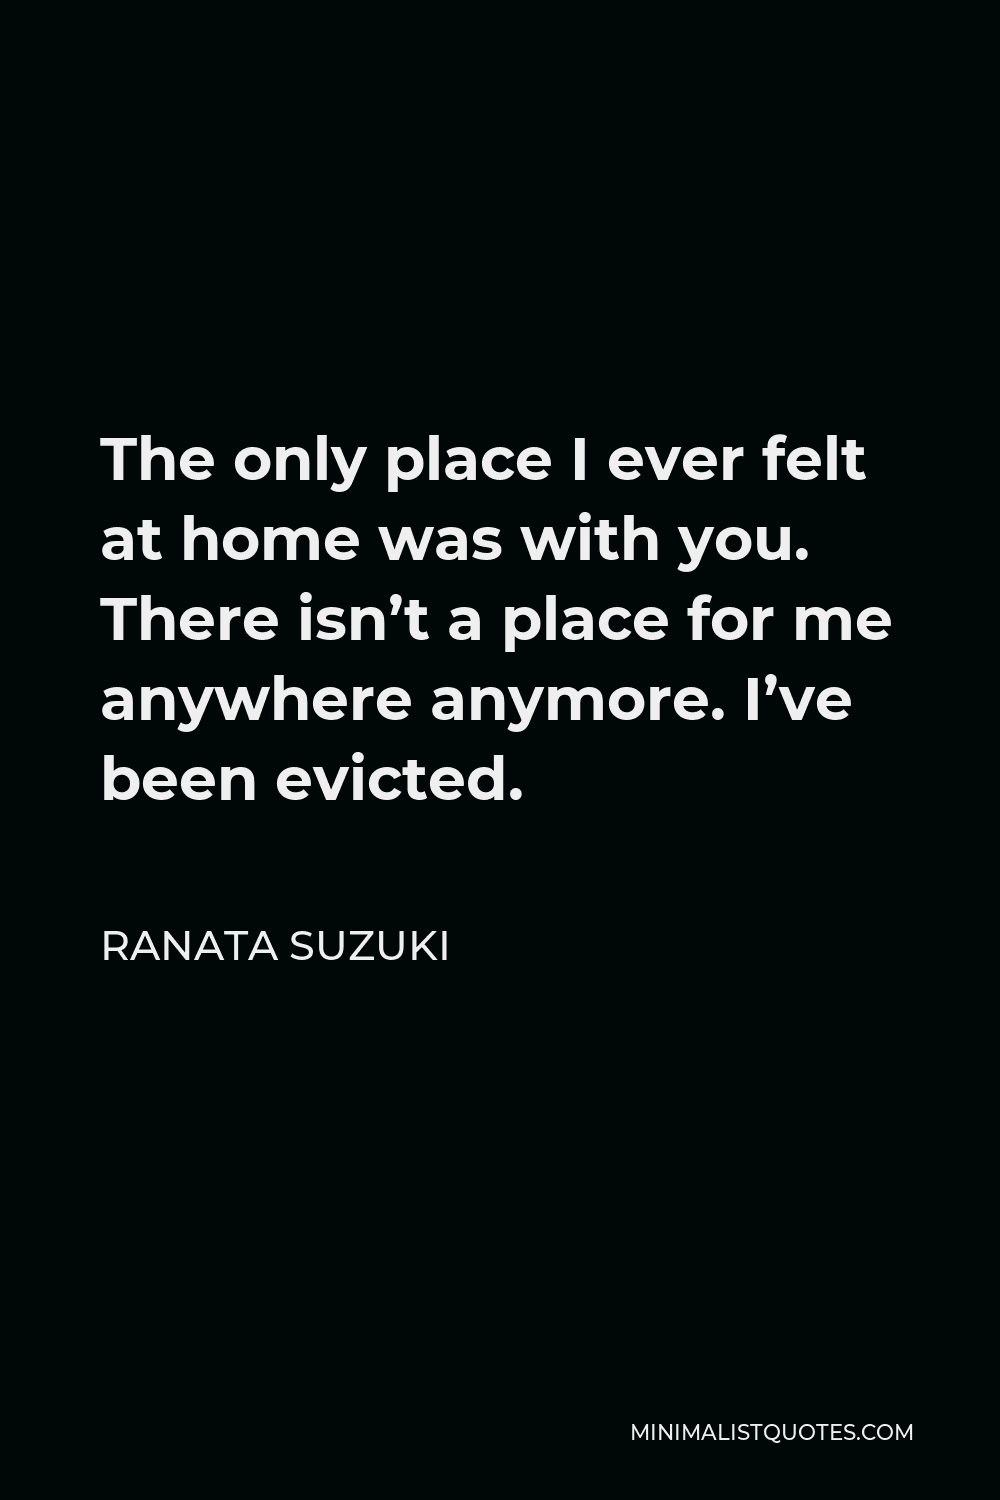 Ranata Suzuki Quote - The only place I ever felt at home was with you. There isn’t a place for me anywhere anymore. I’ve been evicted.